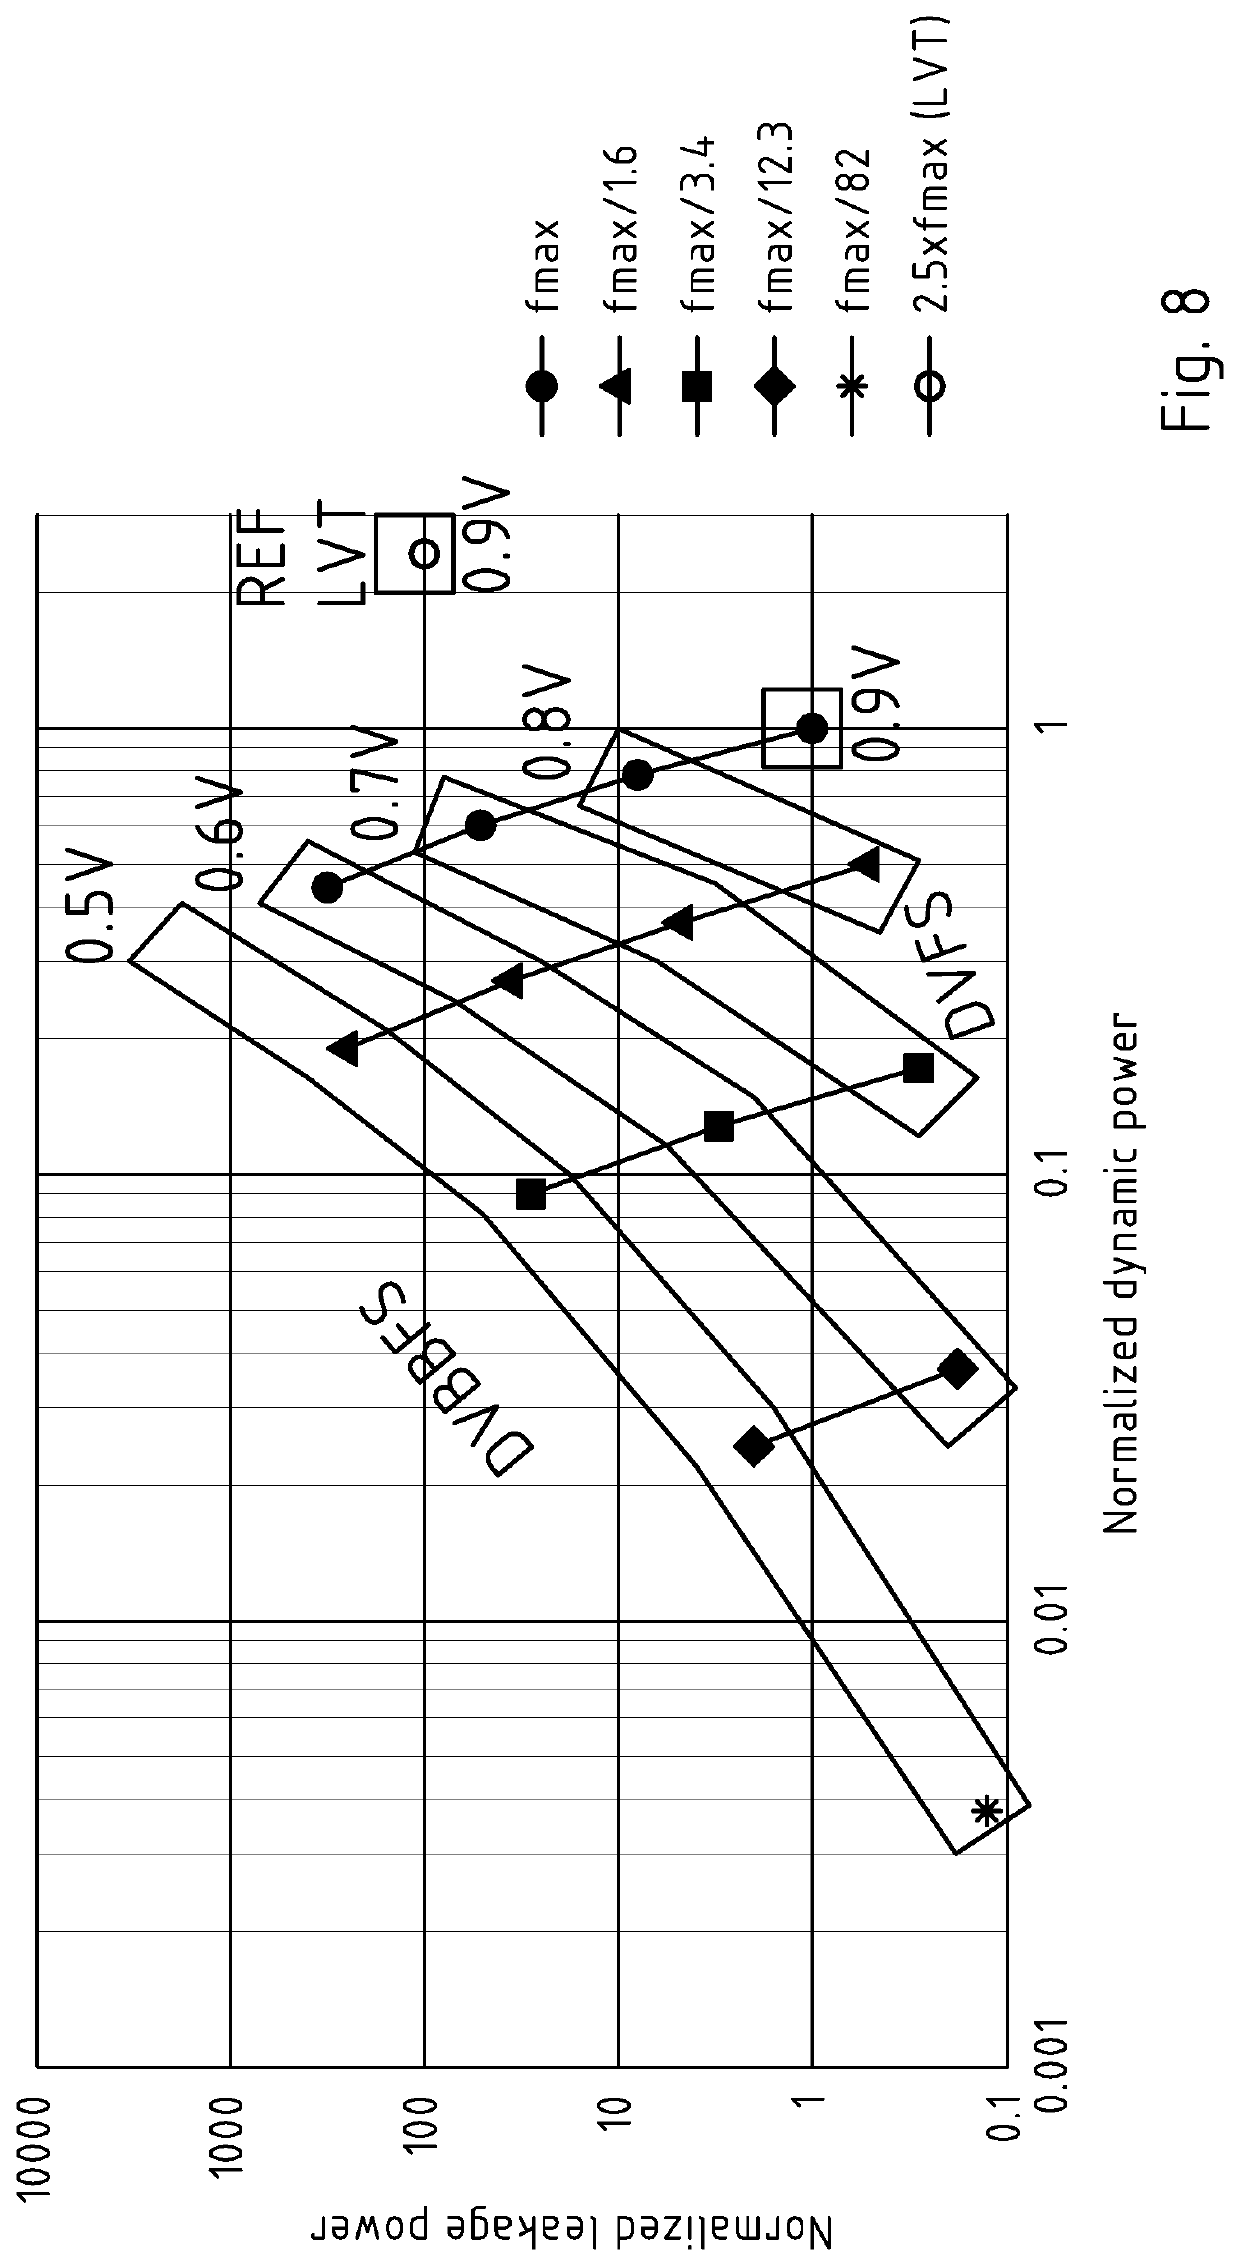 Compensation device for compensating PVT variations of an analog and/or digital circuit